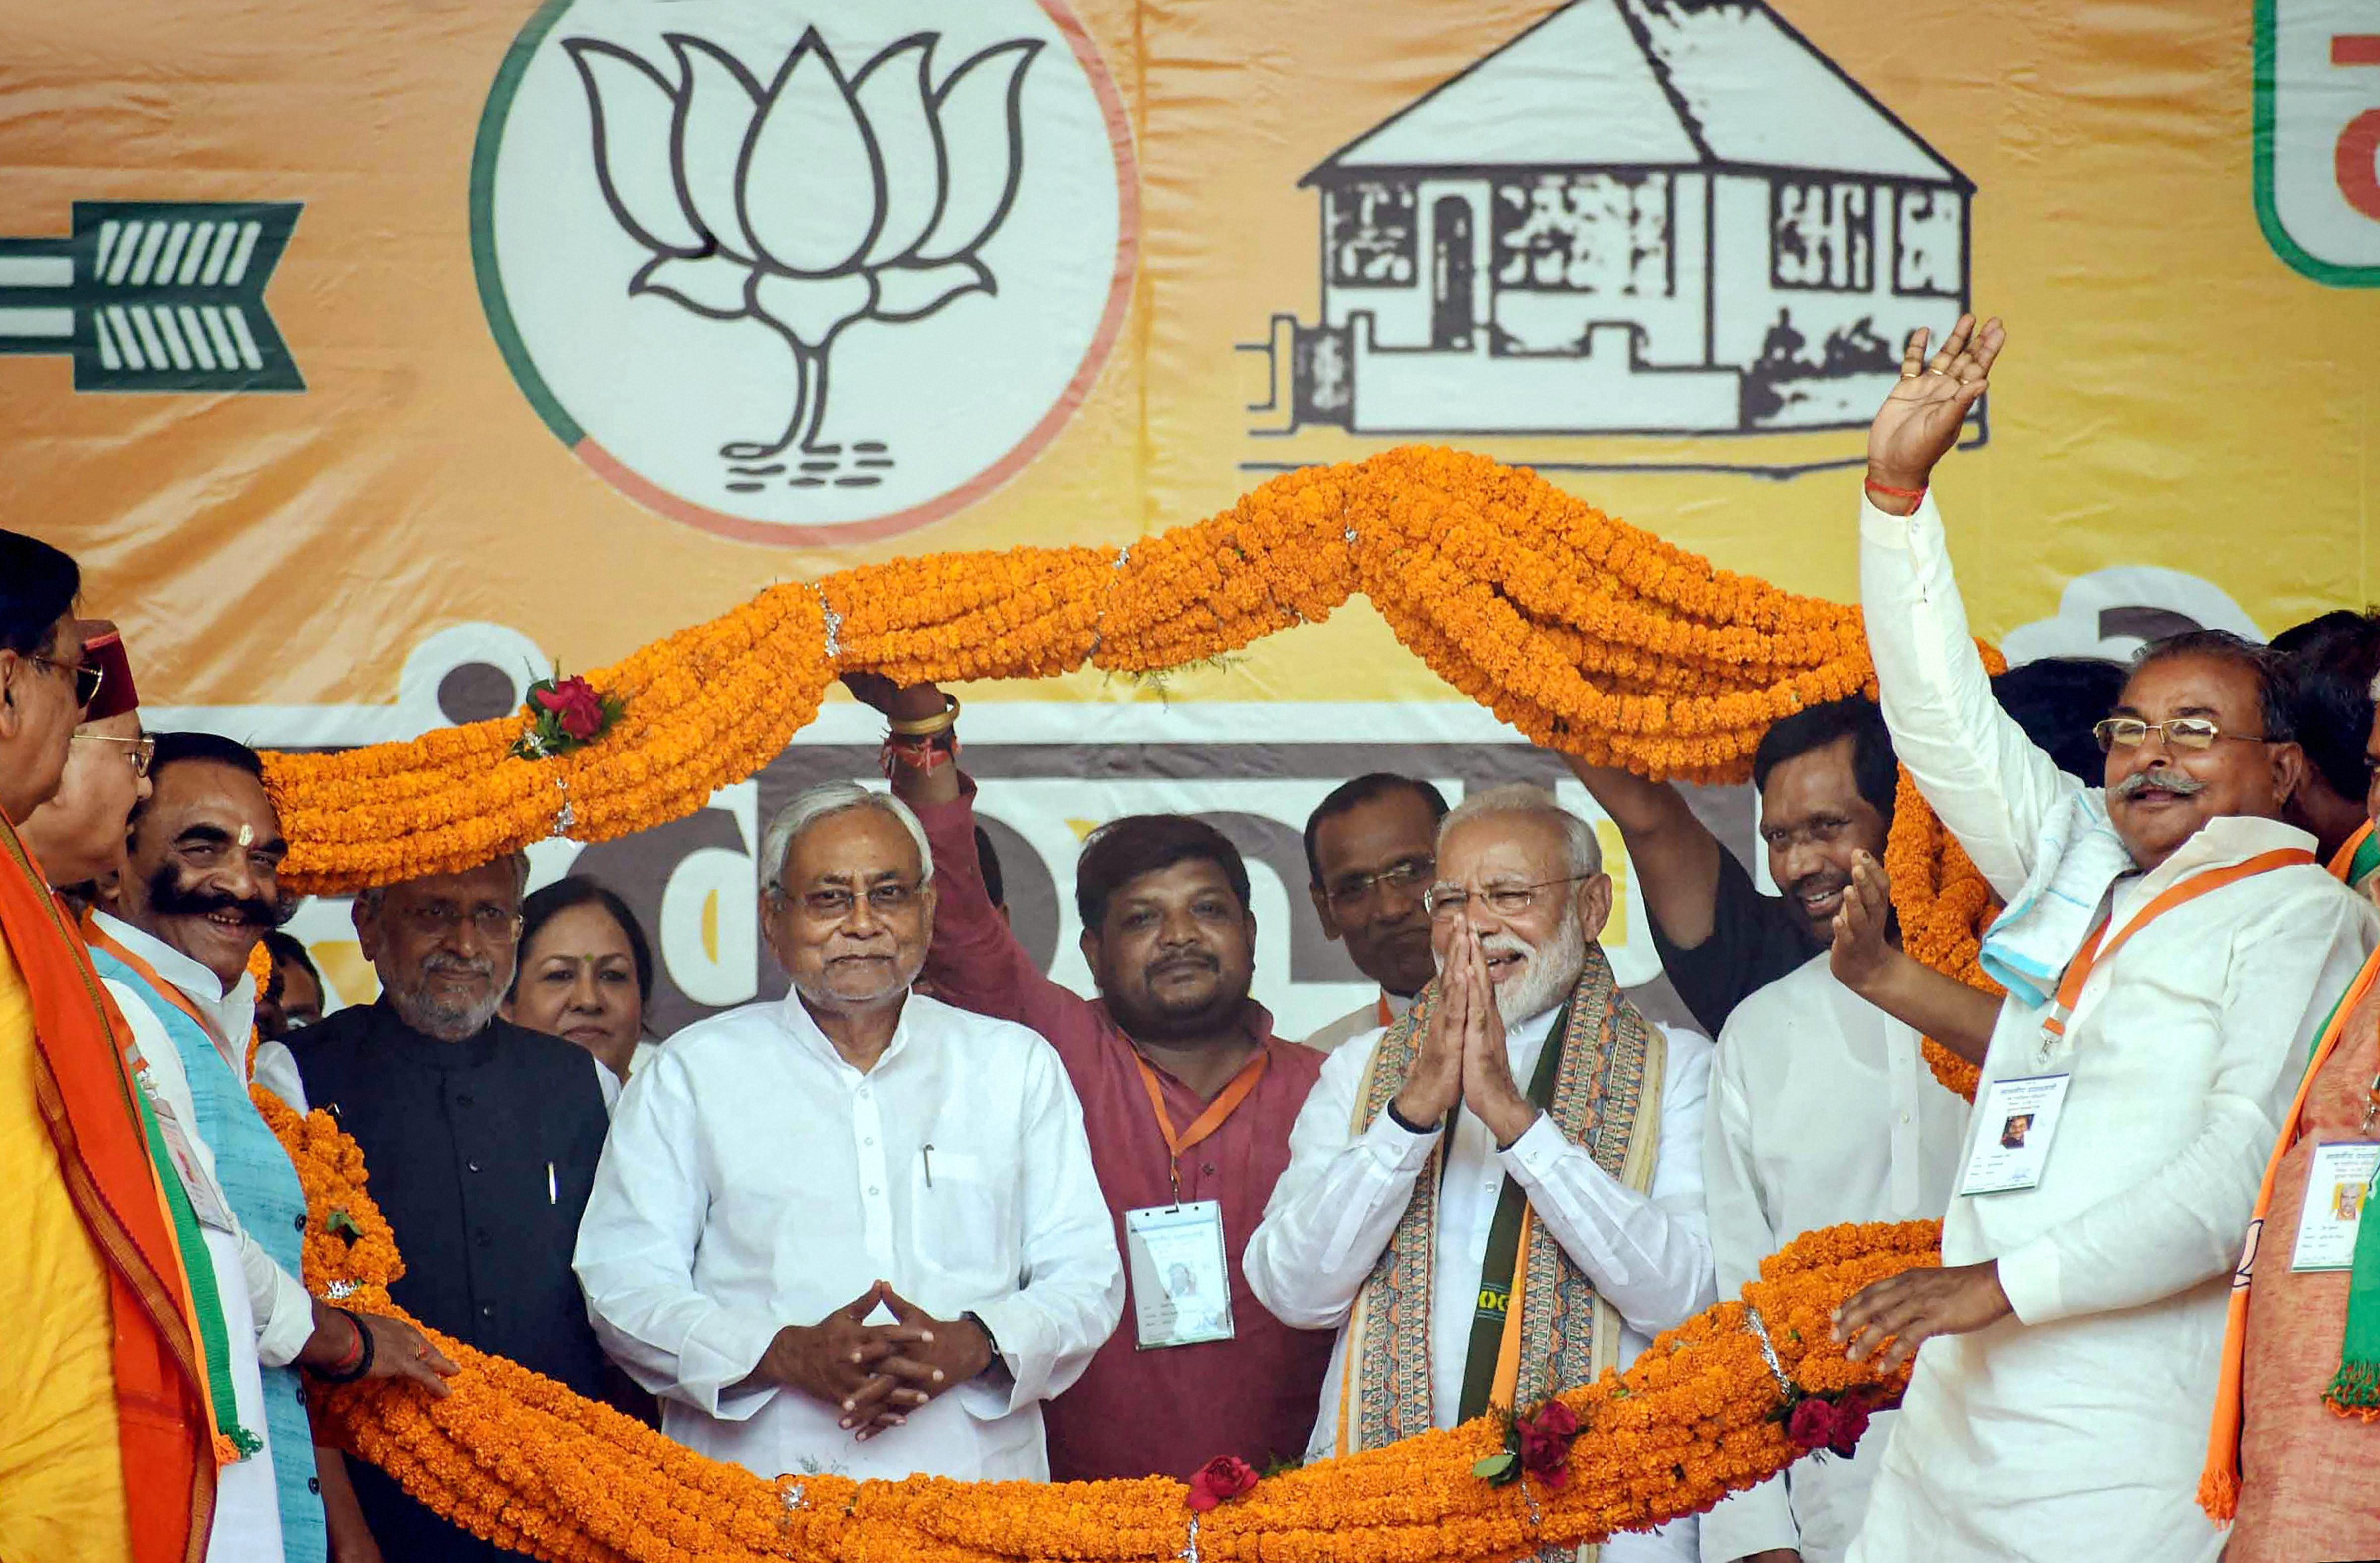 Prime Minister Narendra Modi, Bihar Chief Minister Nitish Kumar and Lok Janshakti Party (LJP) chief Ram Vilas Paswan being garlanded during an election campaign rally ahead of the last phase of the Lok Sabha polls, at Paliganj in Patna - PTI